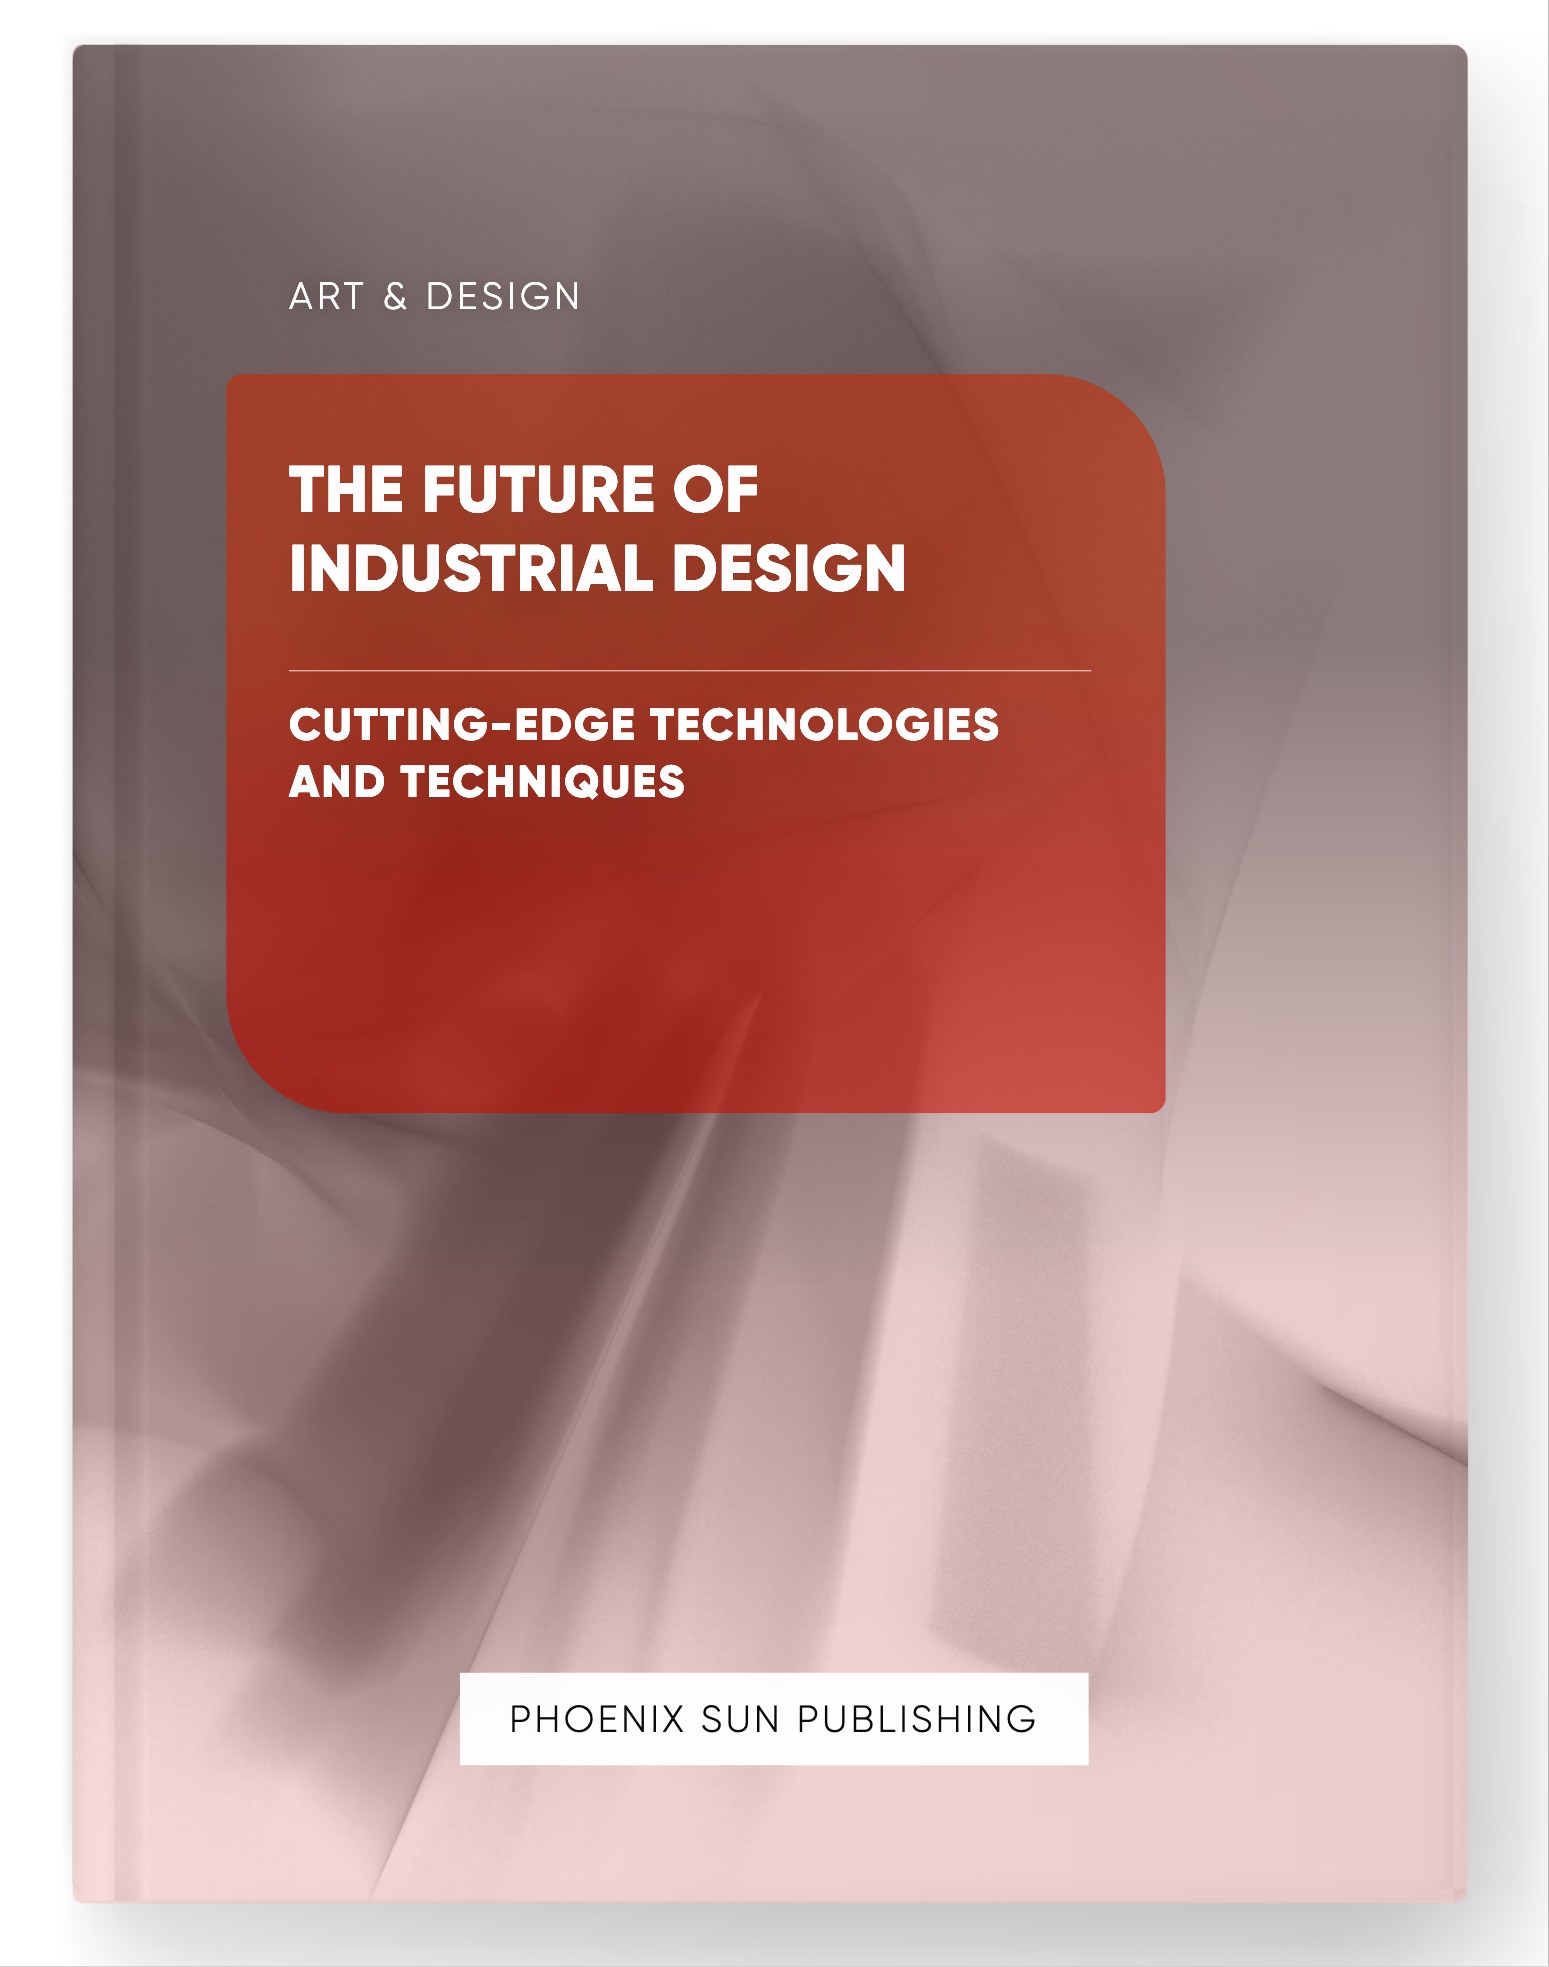 The Future of Industrial Design – Cutting-Edge Technologies and Techniques